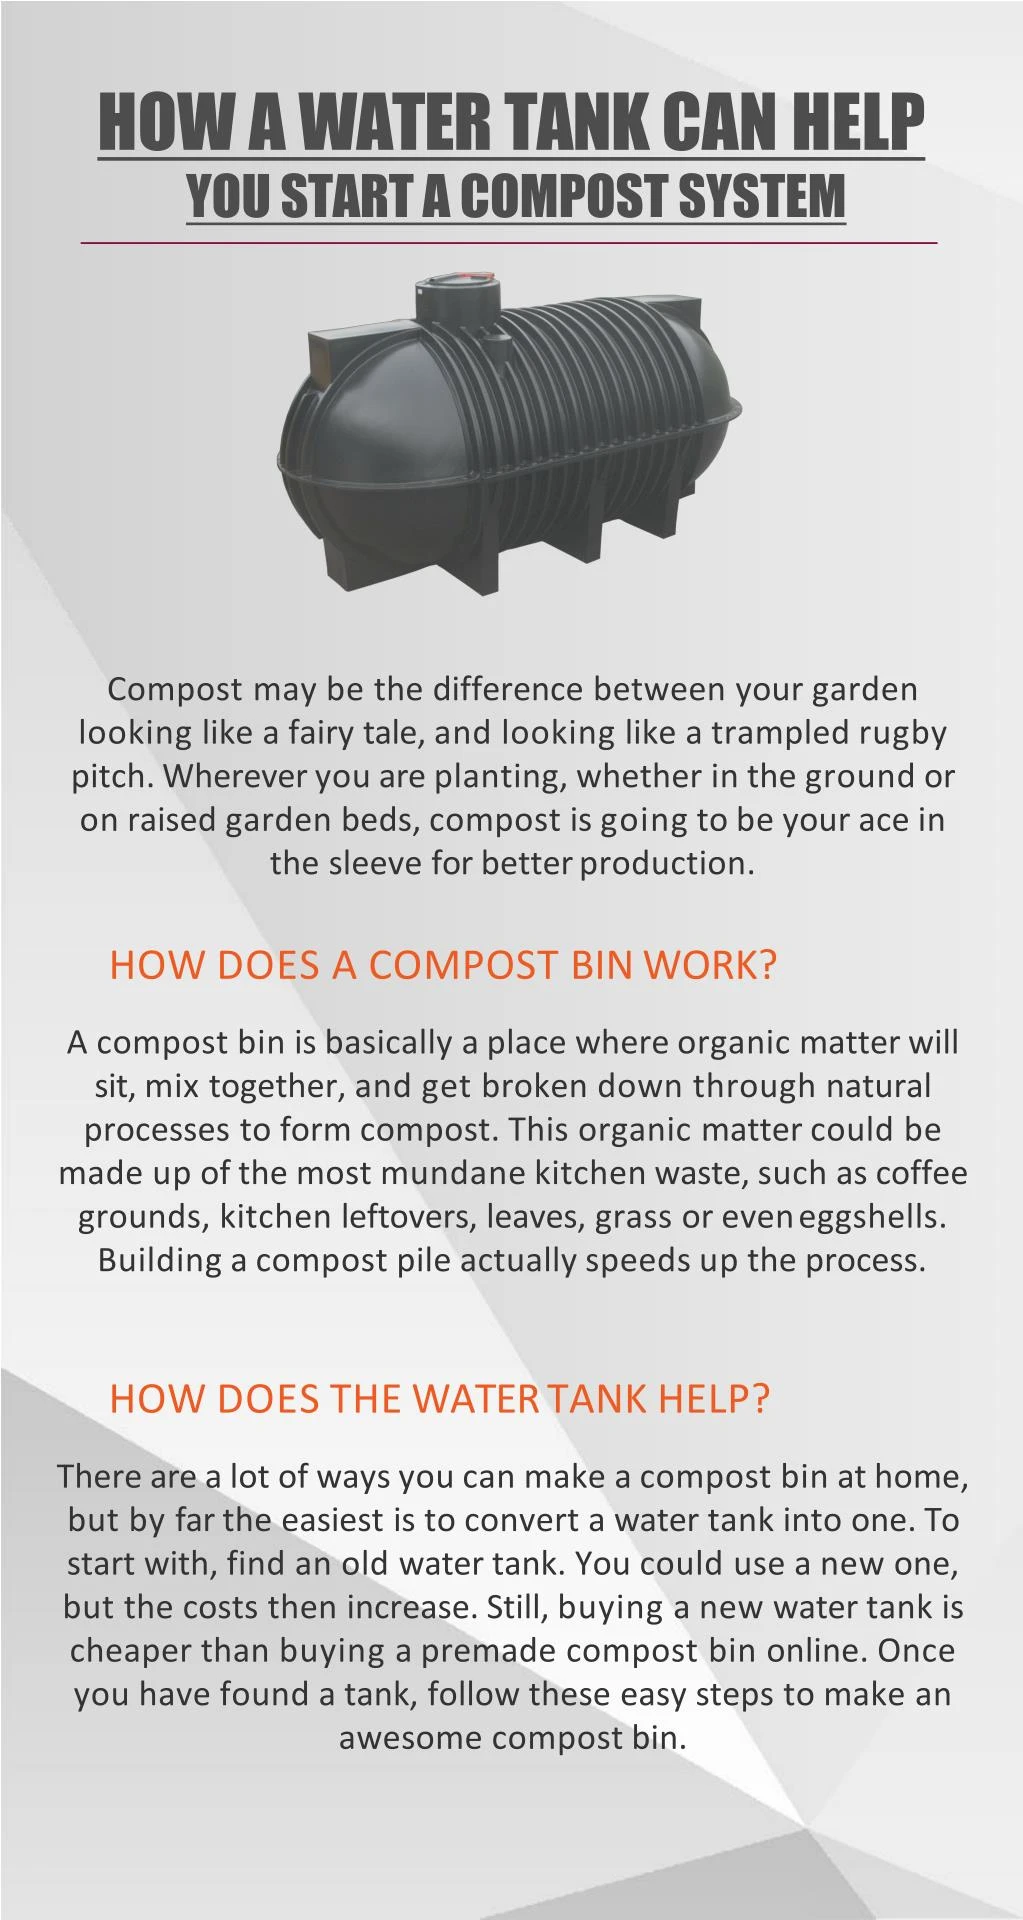 how a water tank can help you start a compost system